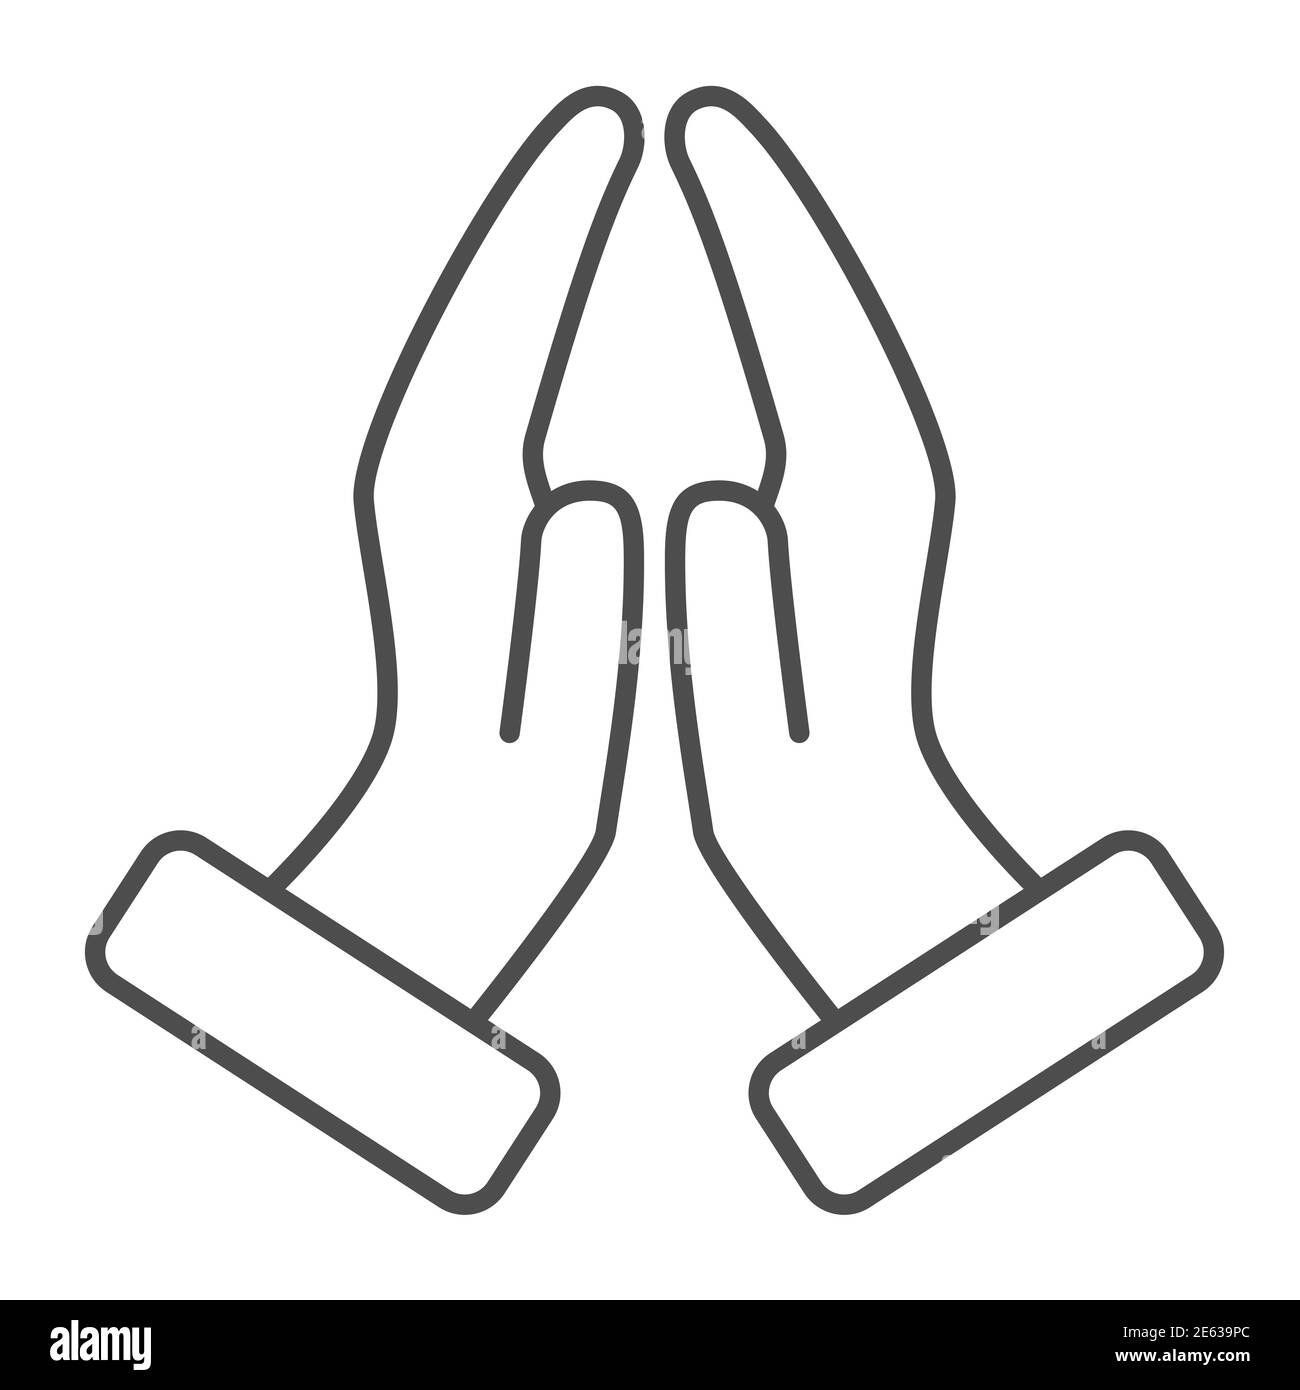 Pray hands gesture thin line icon, gestures concept, hands together in religious prayer sign on white background, Hand beg icon in outline style for Stock Vector